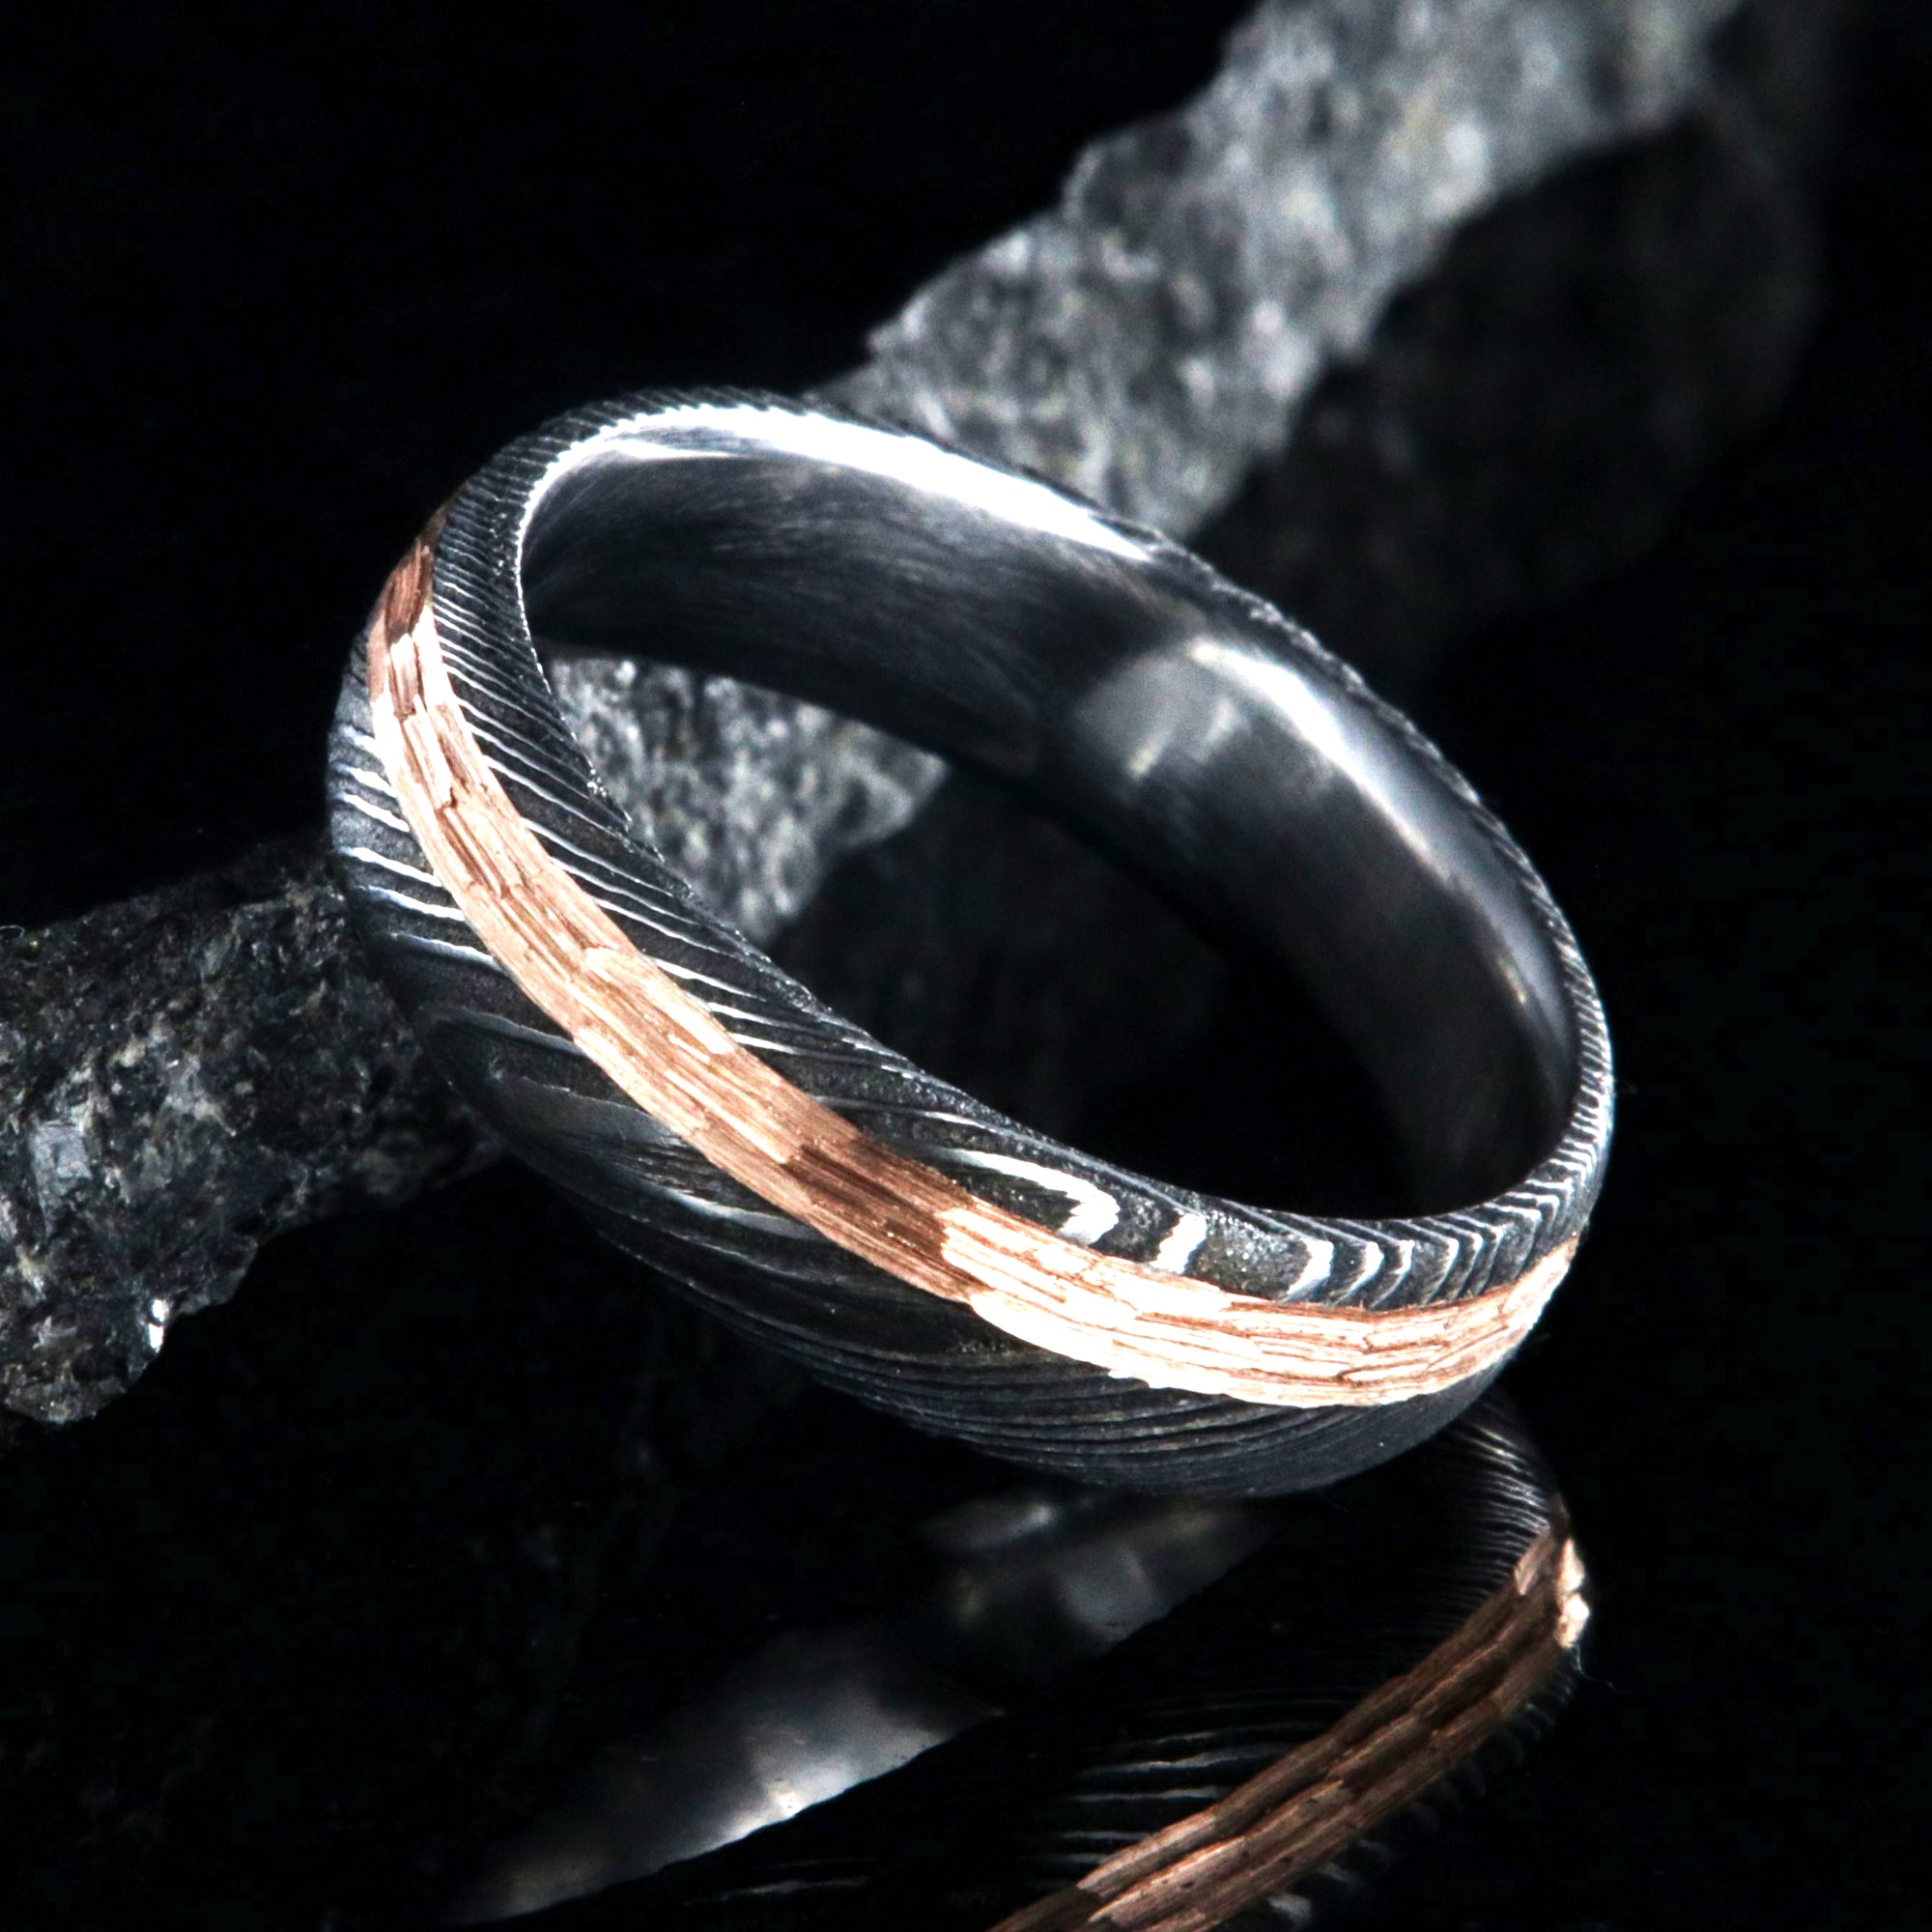 6mm wide black Damascus steel wedding band with a 2mm wide hammered rose gold inlay